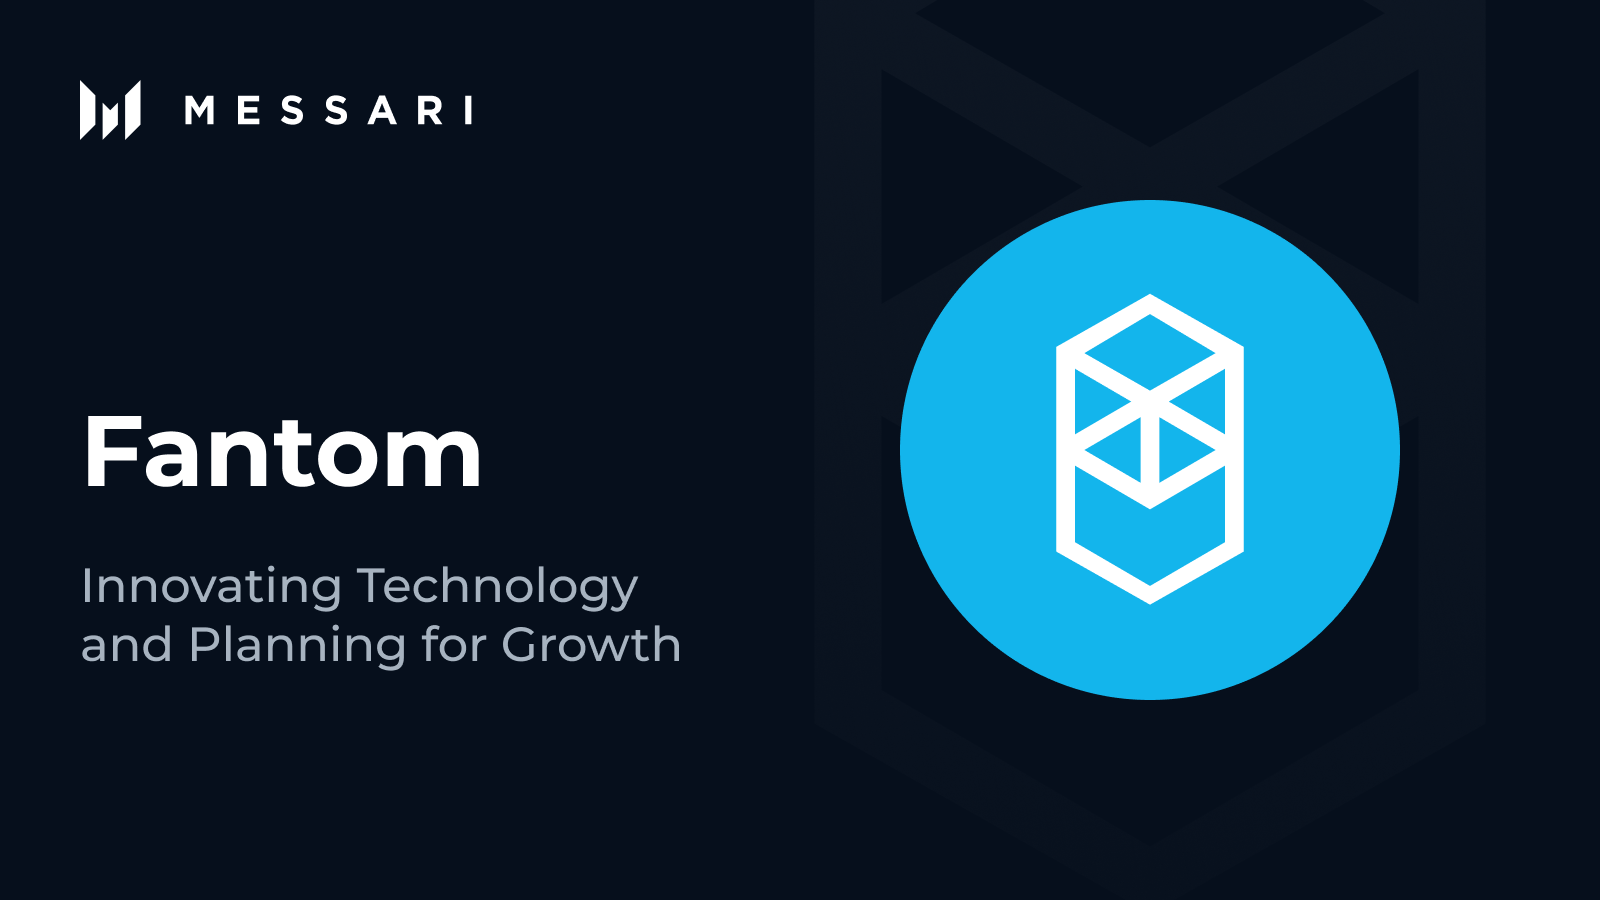 Fantom: Innovating Technology and Planning for Growth